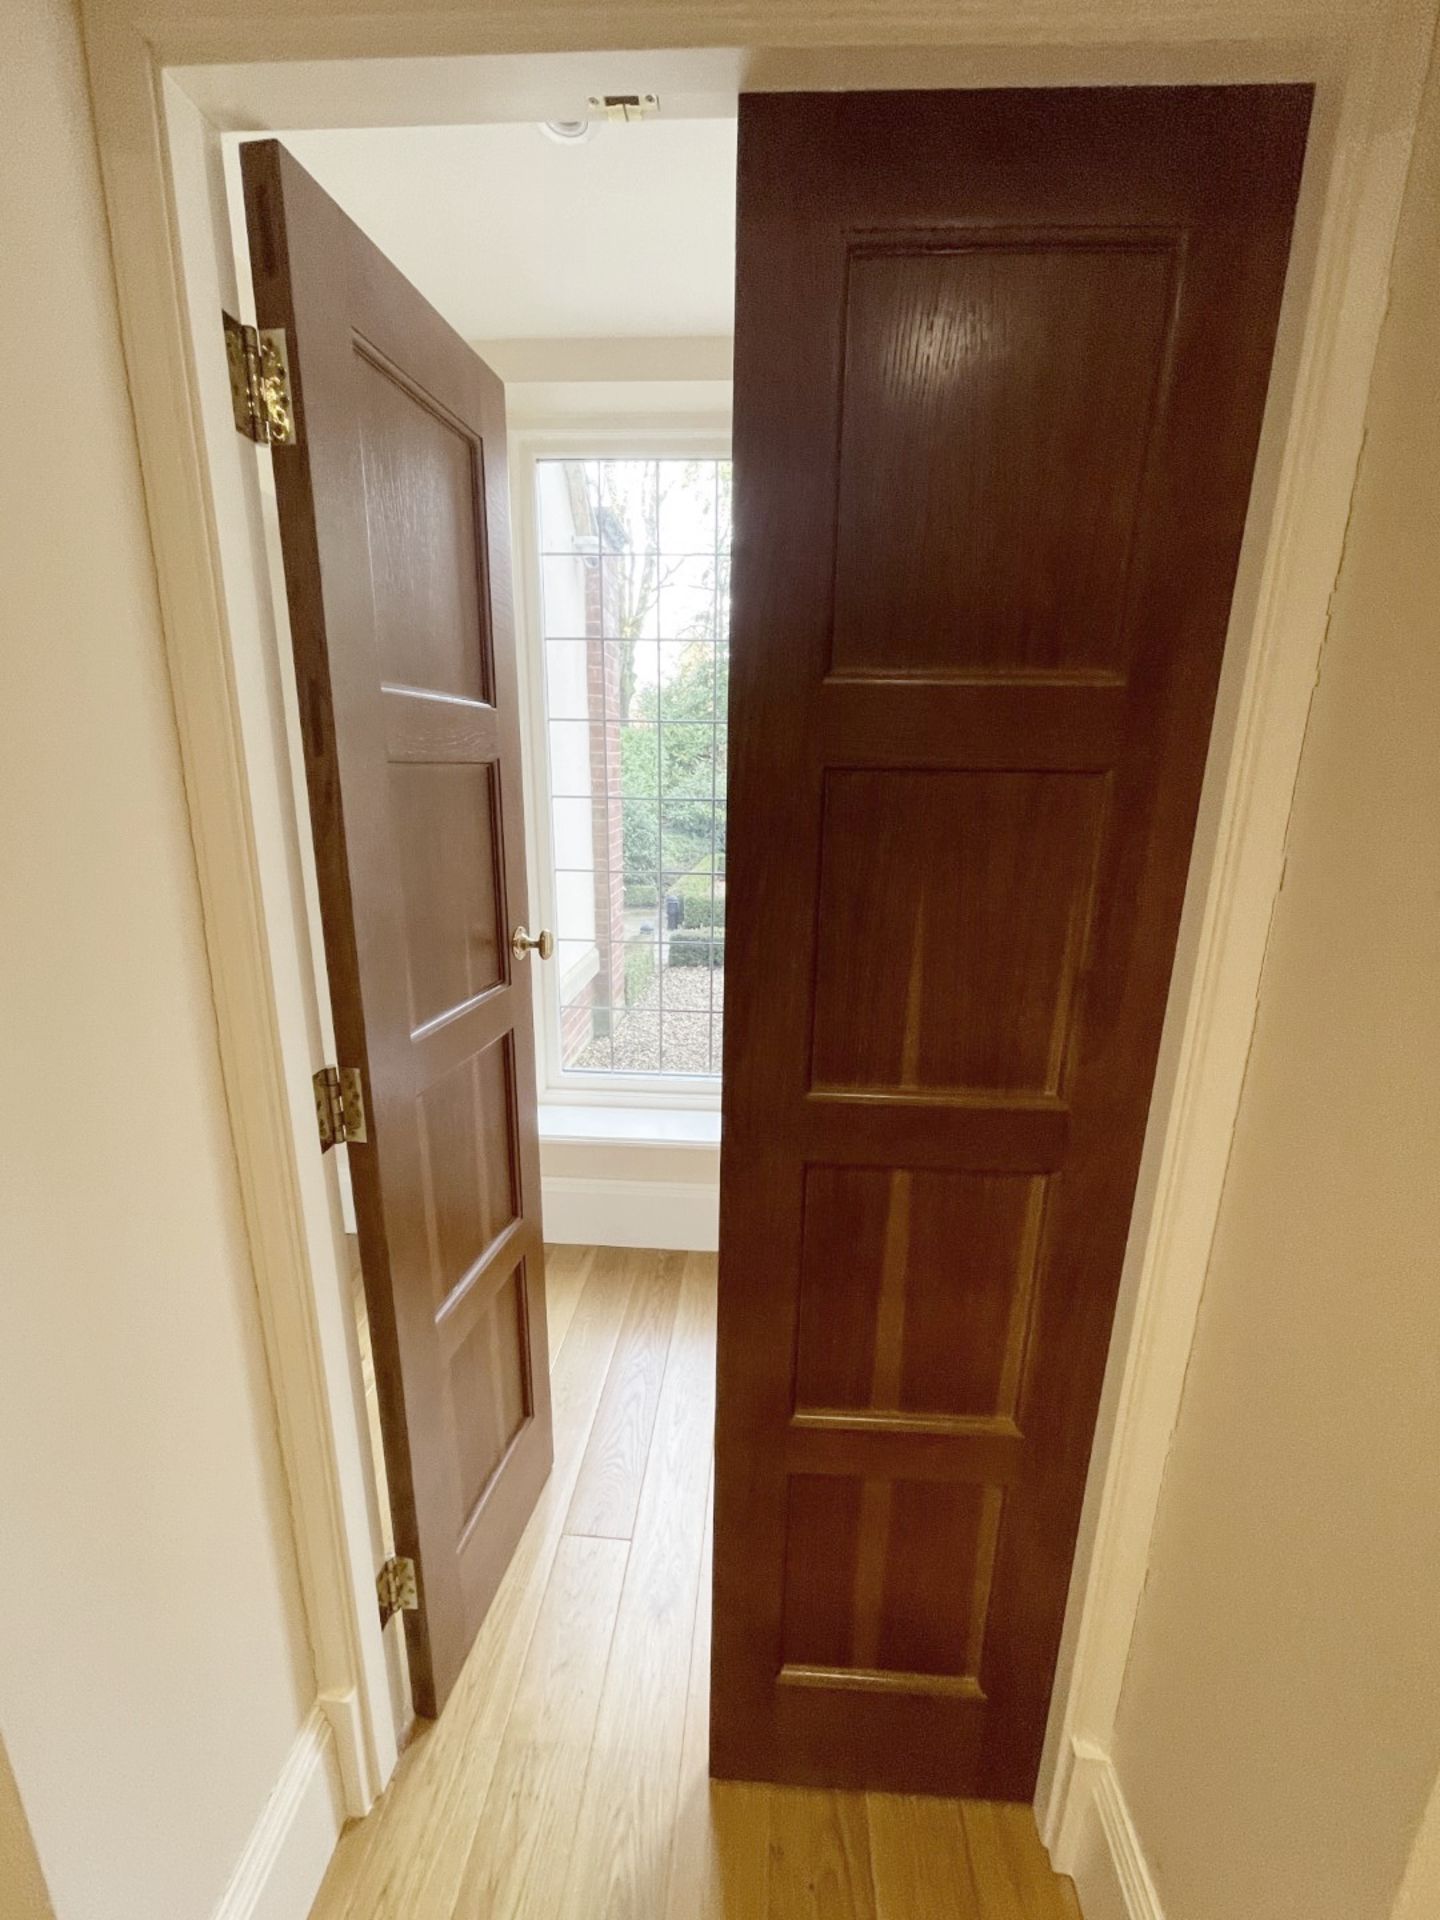 1 x Set of Solid Wood Stately Internal Double Doors - Ref: PAN200 - Image 2 of 9